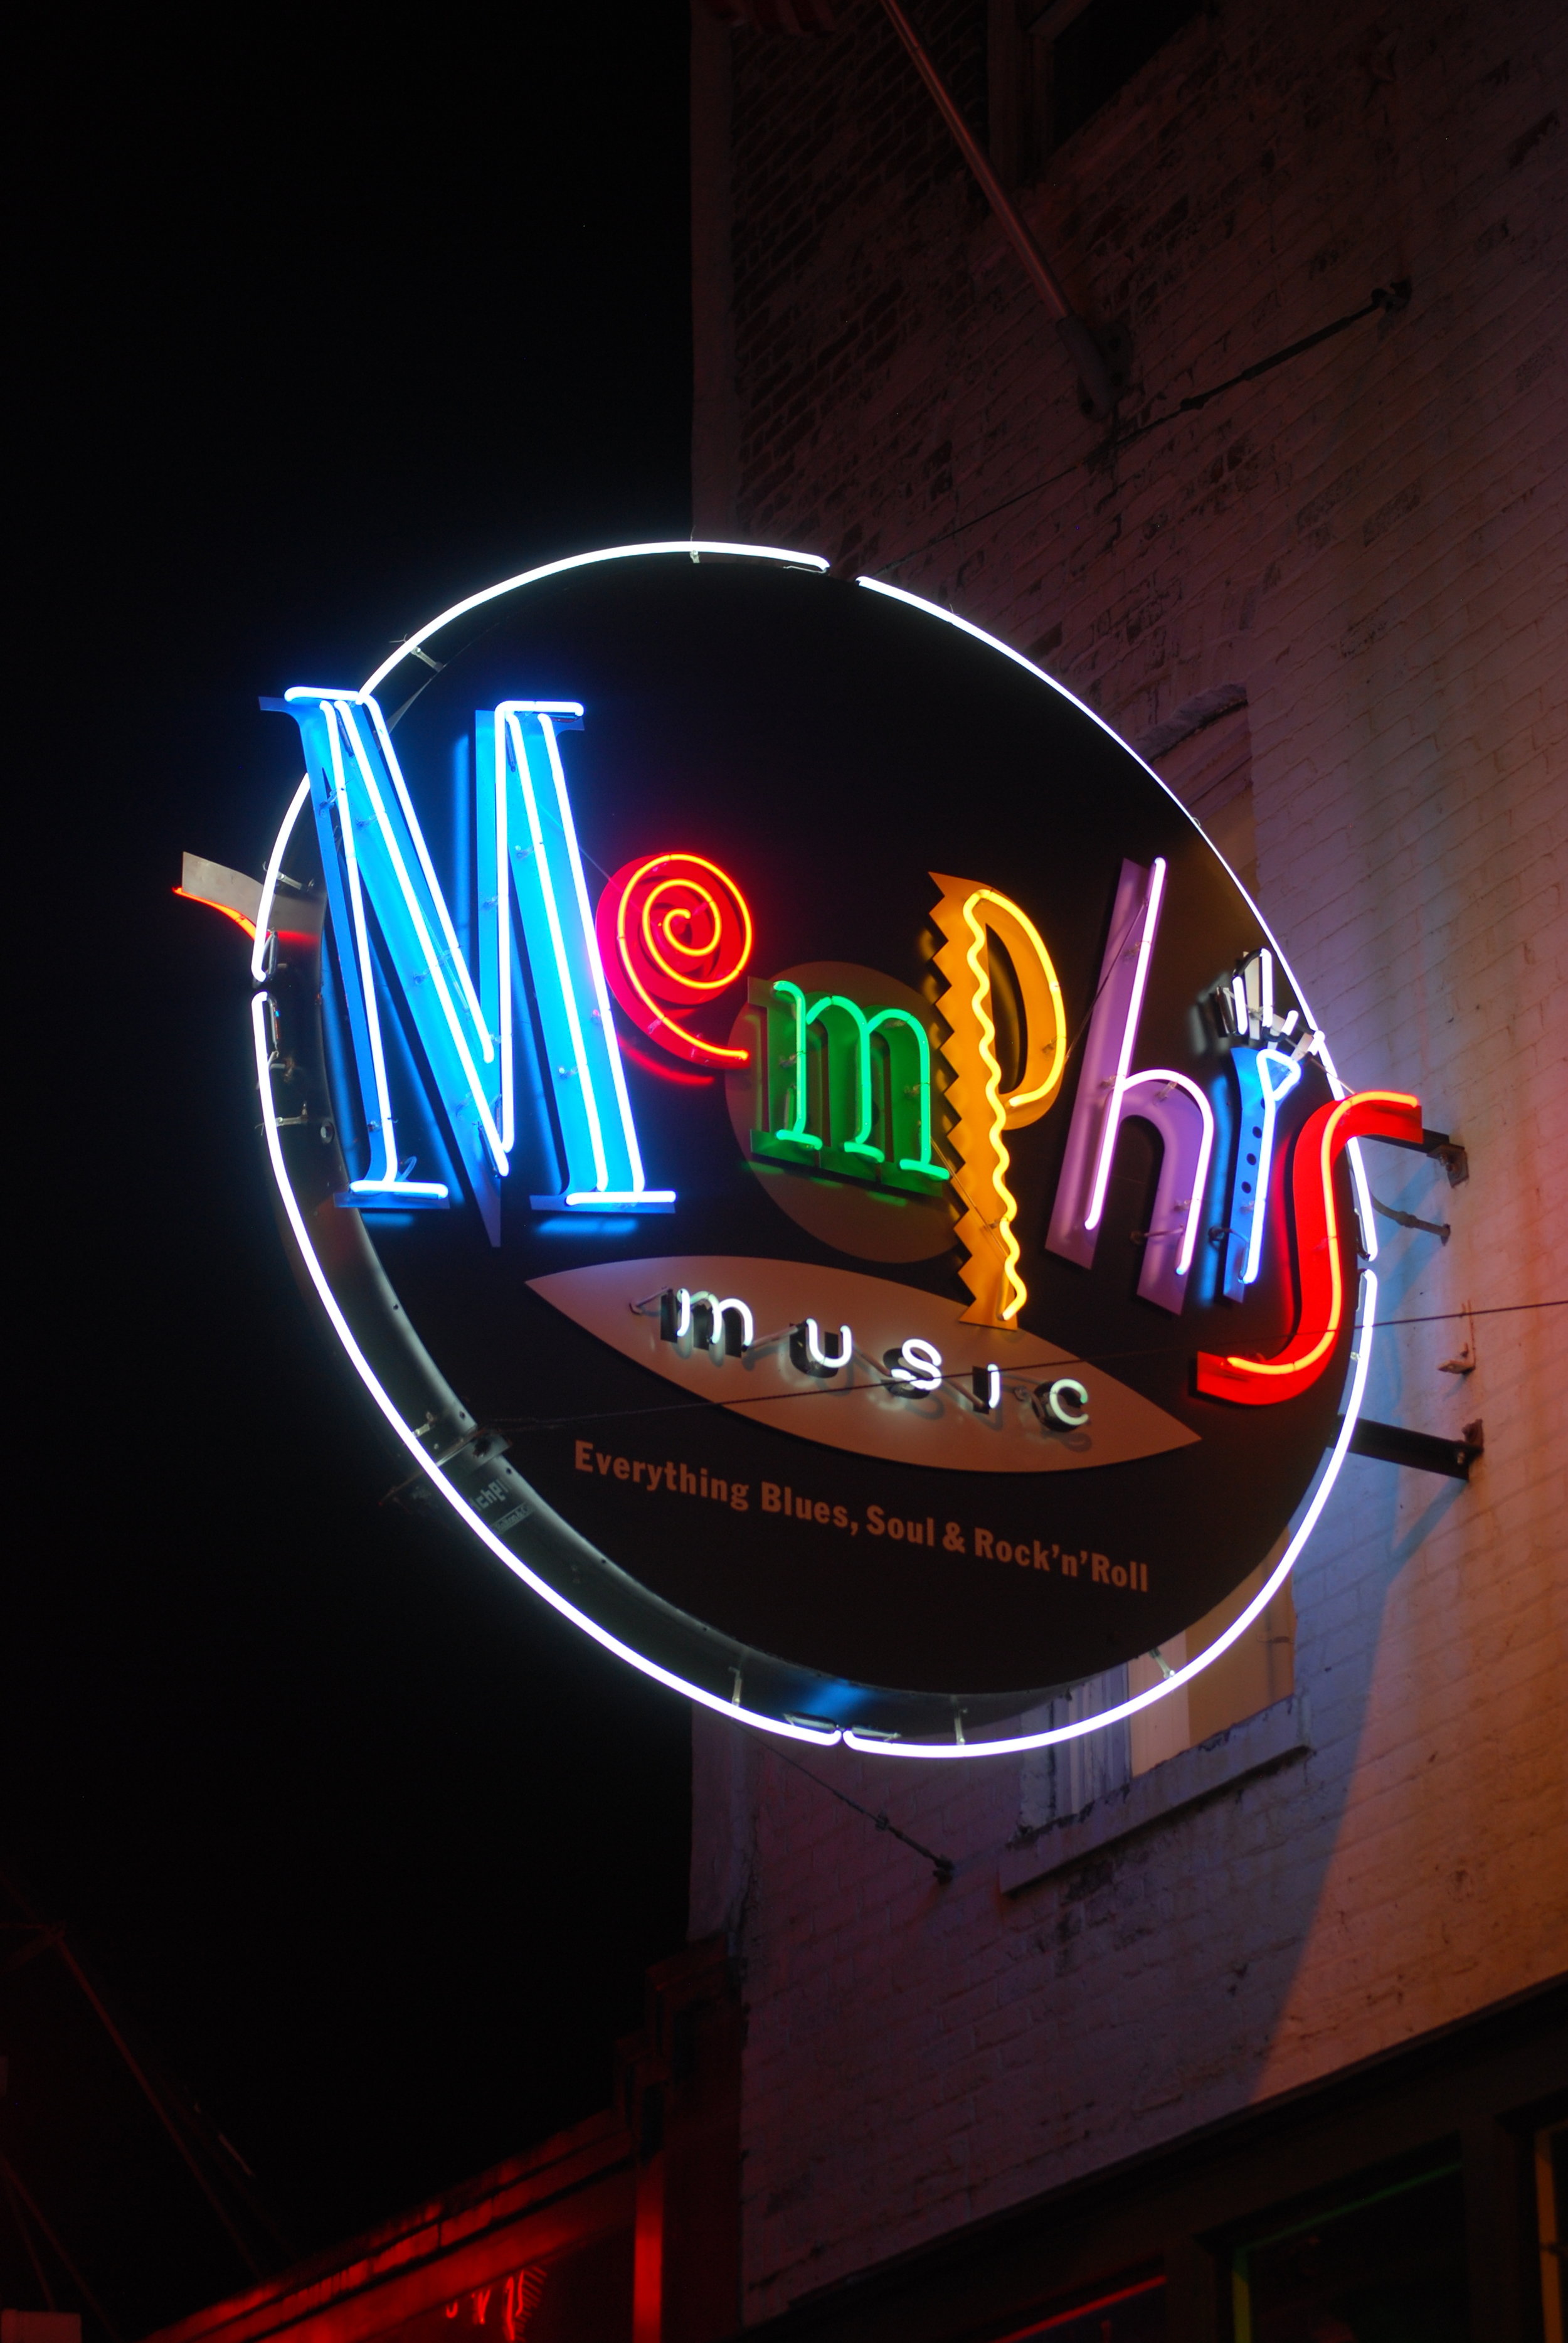  Memphis Music exterior sign  Branding creative and design by Chuck Mitchell  “Everything Blues” tag-line by Chuck Mitchell  Memphis Music Store image as seen on Bluff City Law  Beale Street Memphis, Tennessee  Sign fabrication and installation by Fr